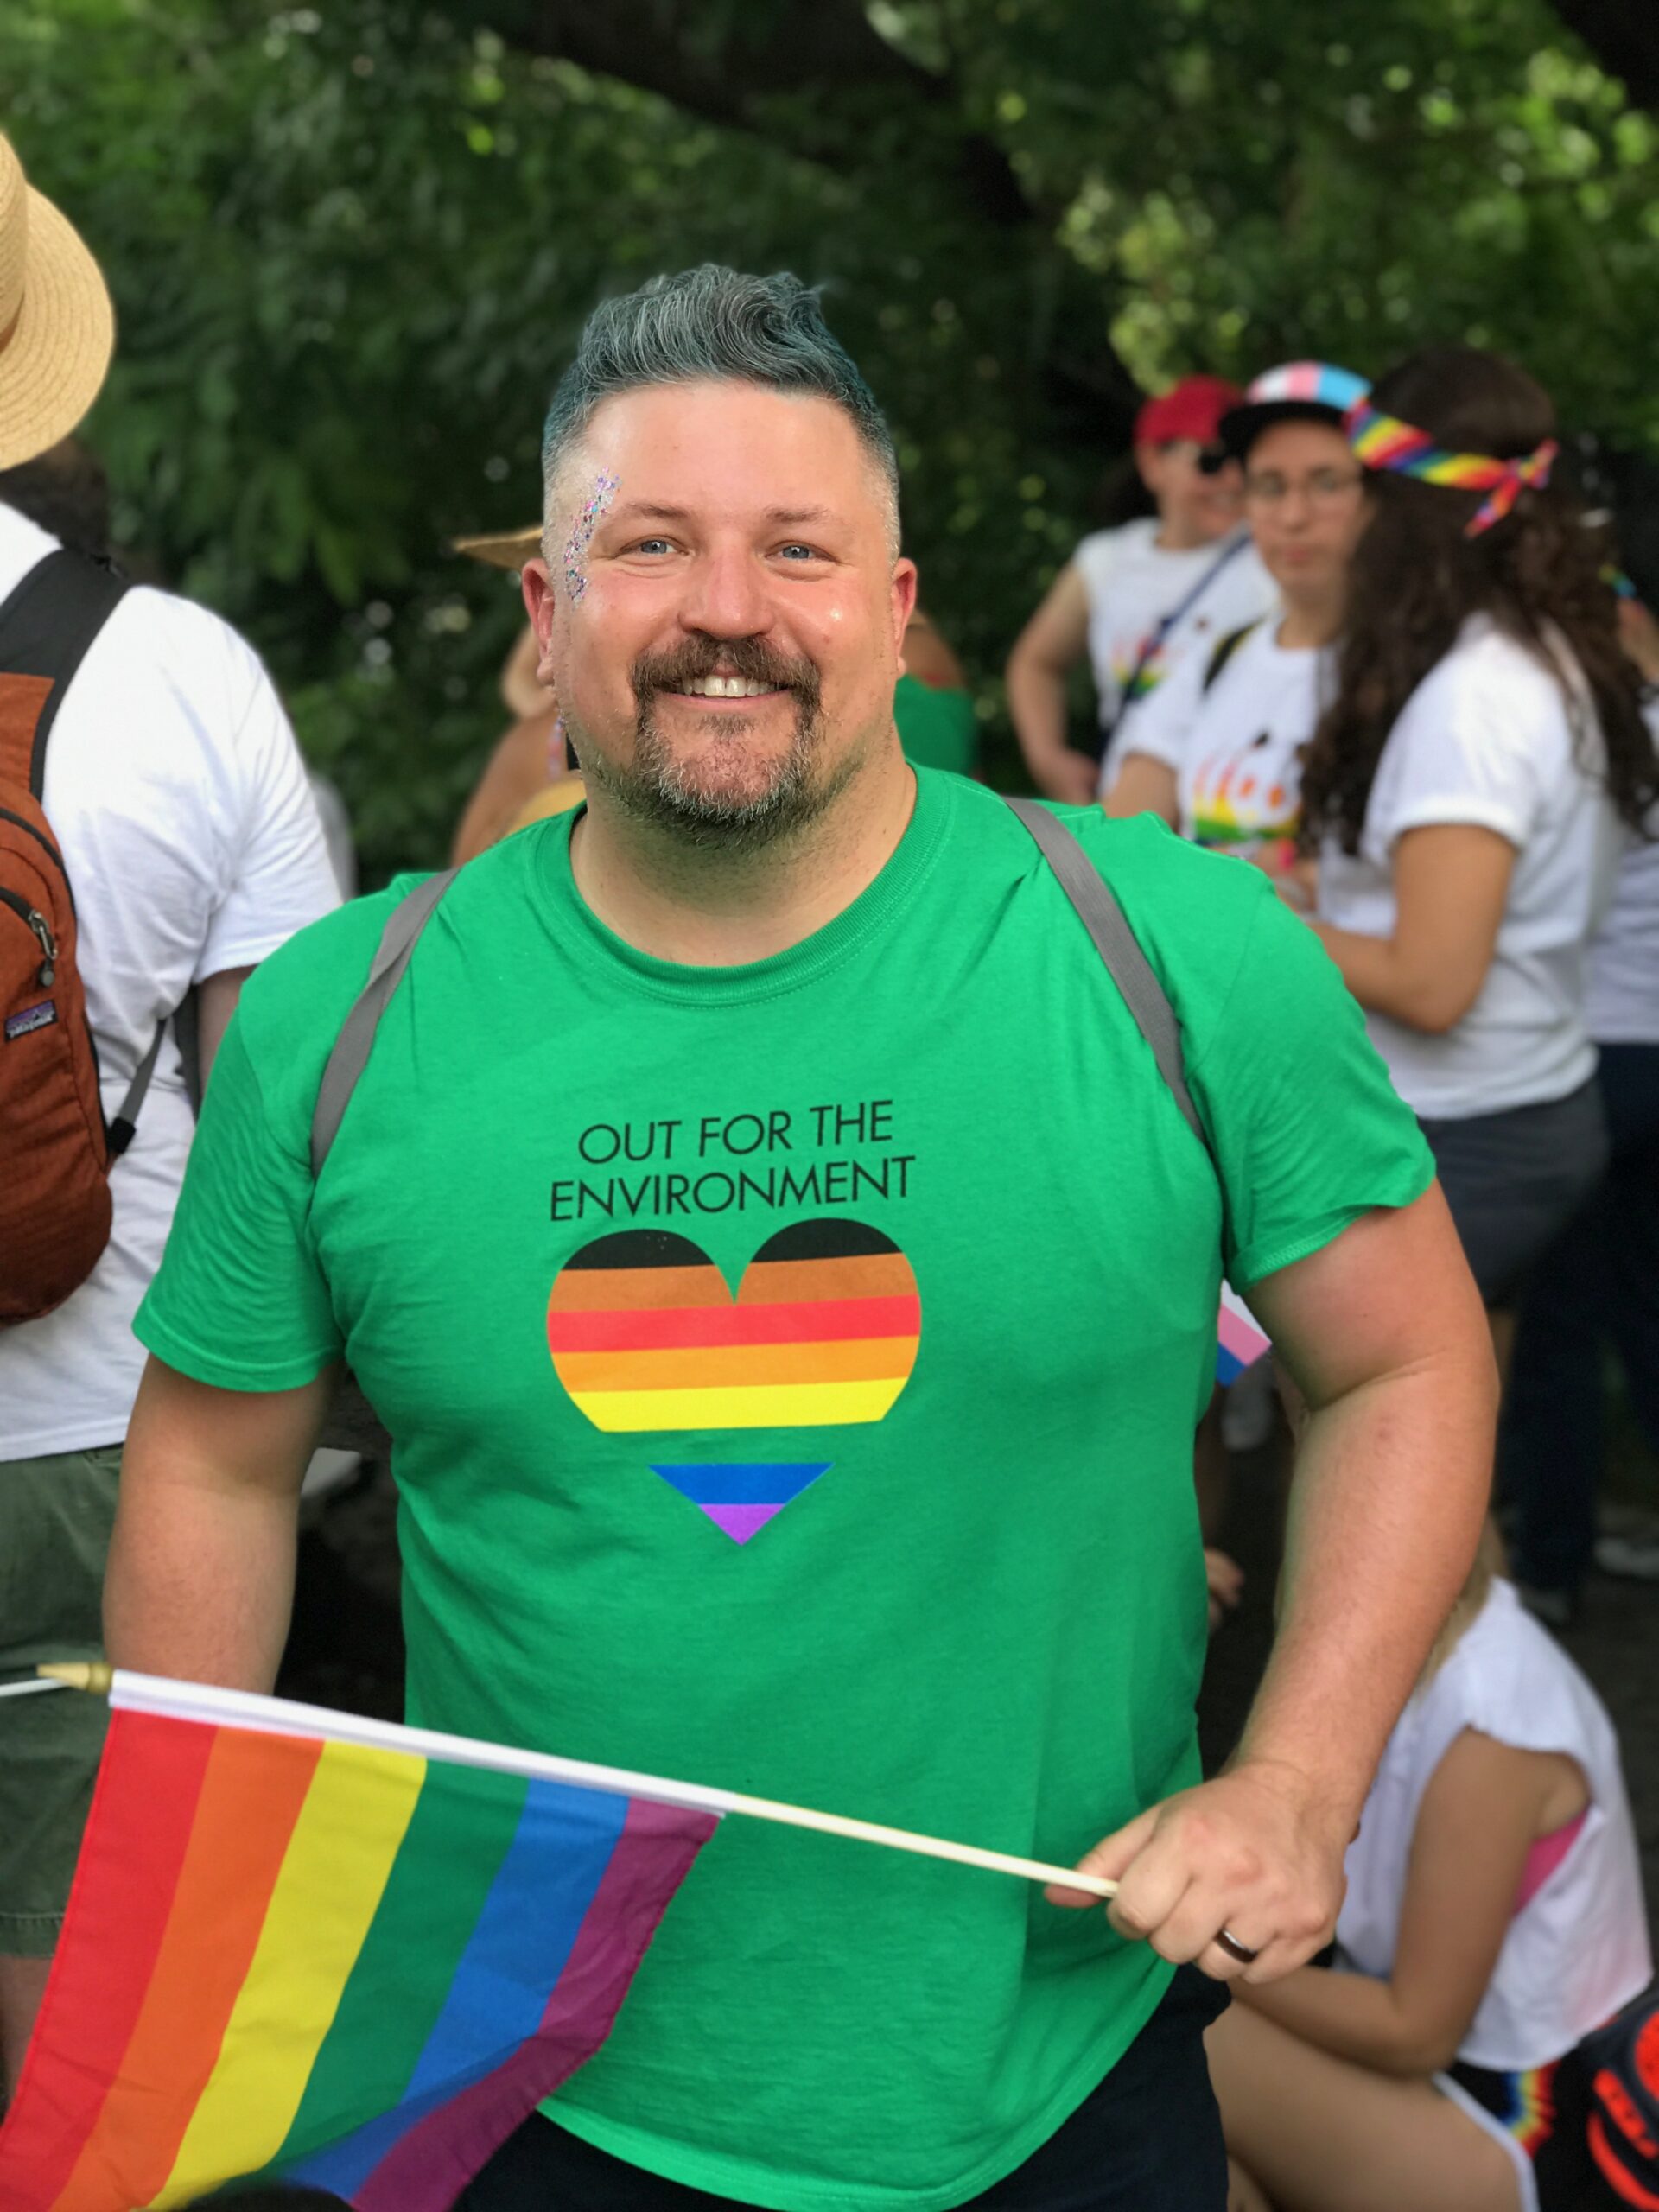 A person wearing a green t-shirt that reads, "OUT FOR THE ENVIRONMENT" is holding a rainbow flag.